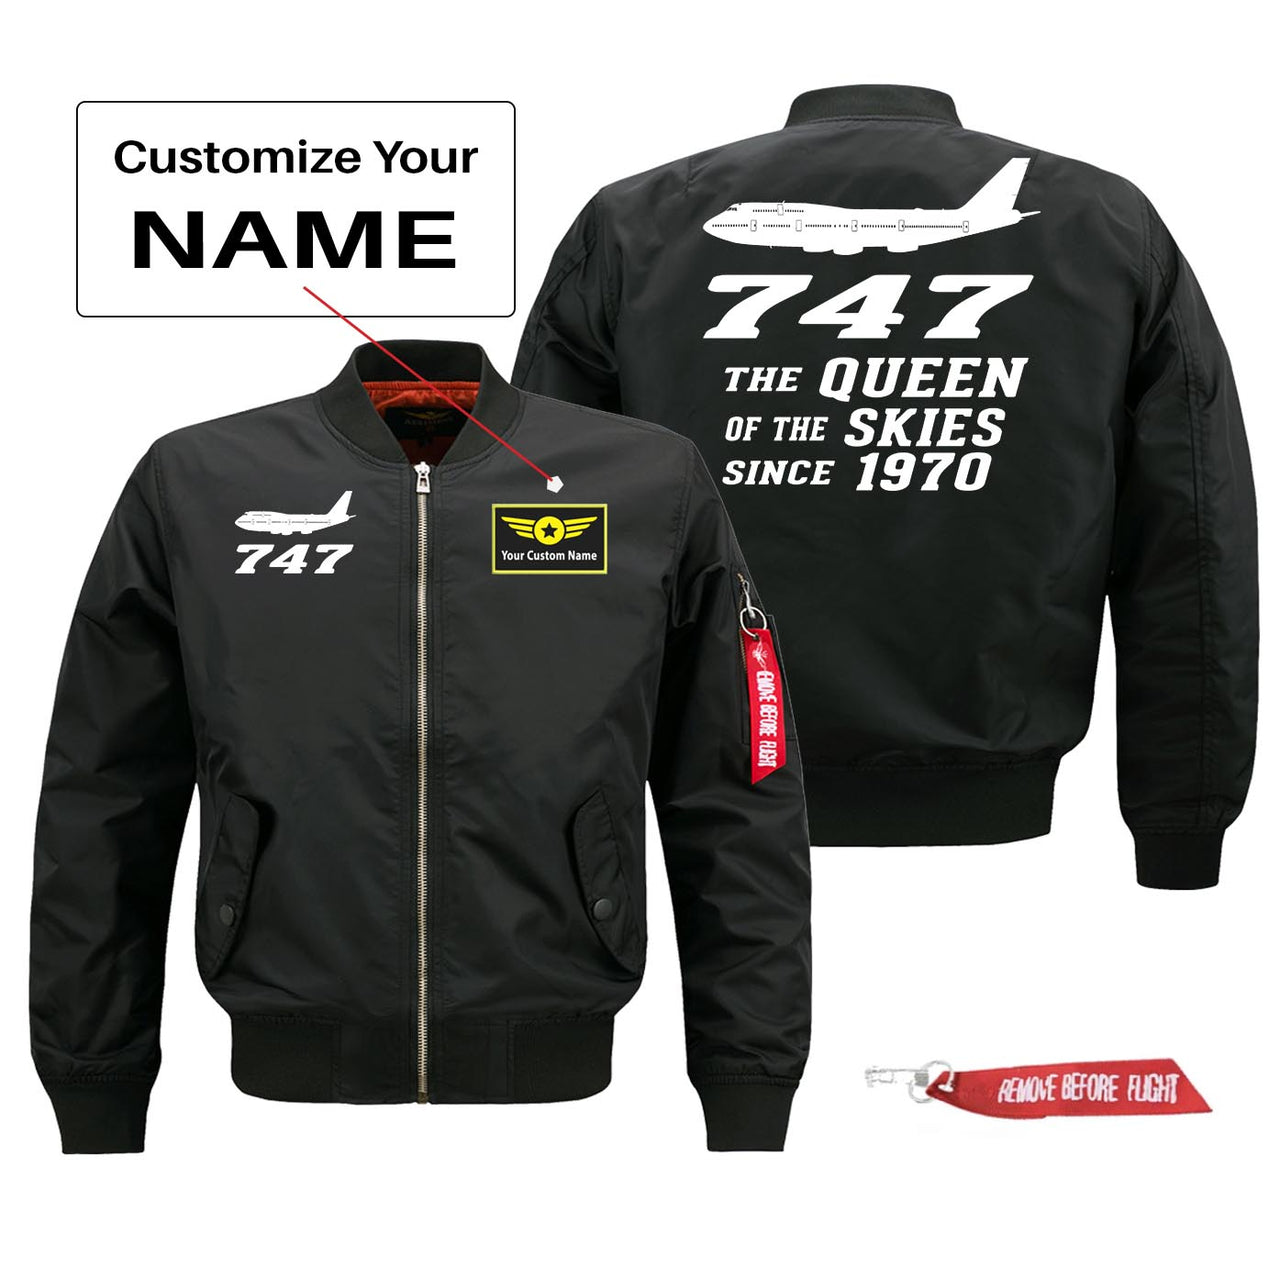 Boeing 747 Queen of The Skies (2) Designed Pilot Jackets (Customizable)